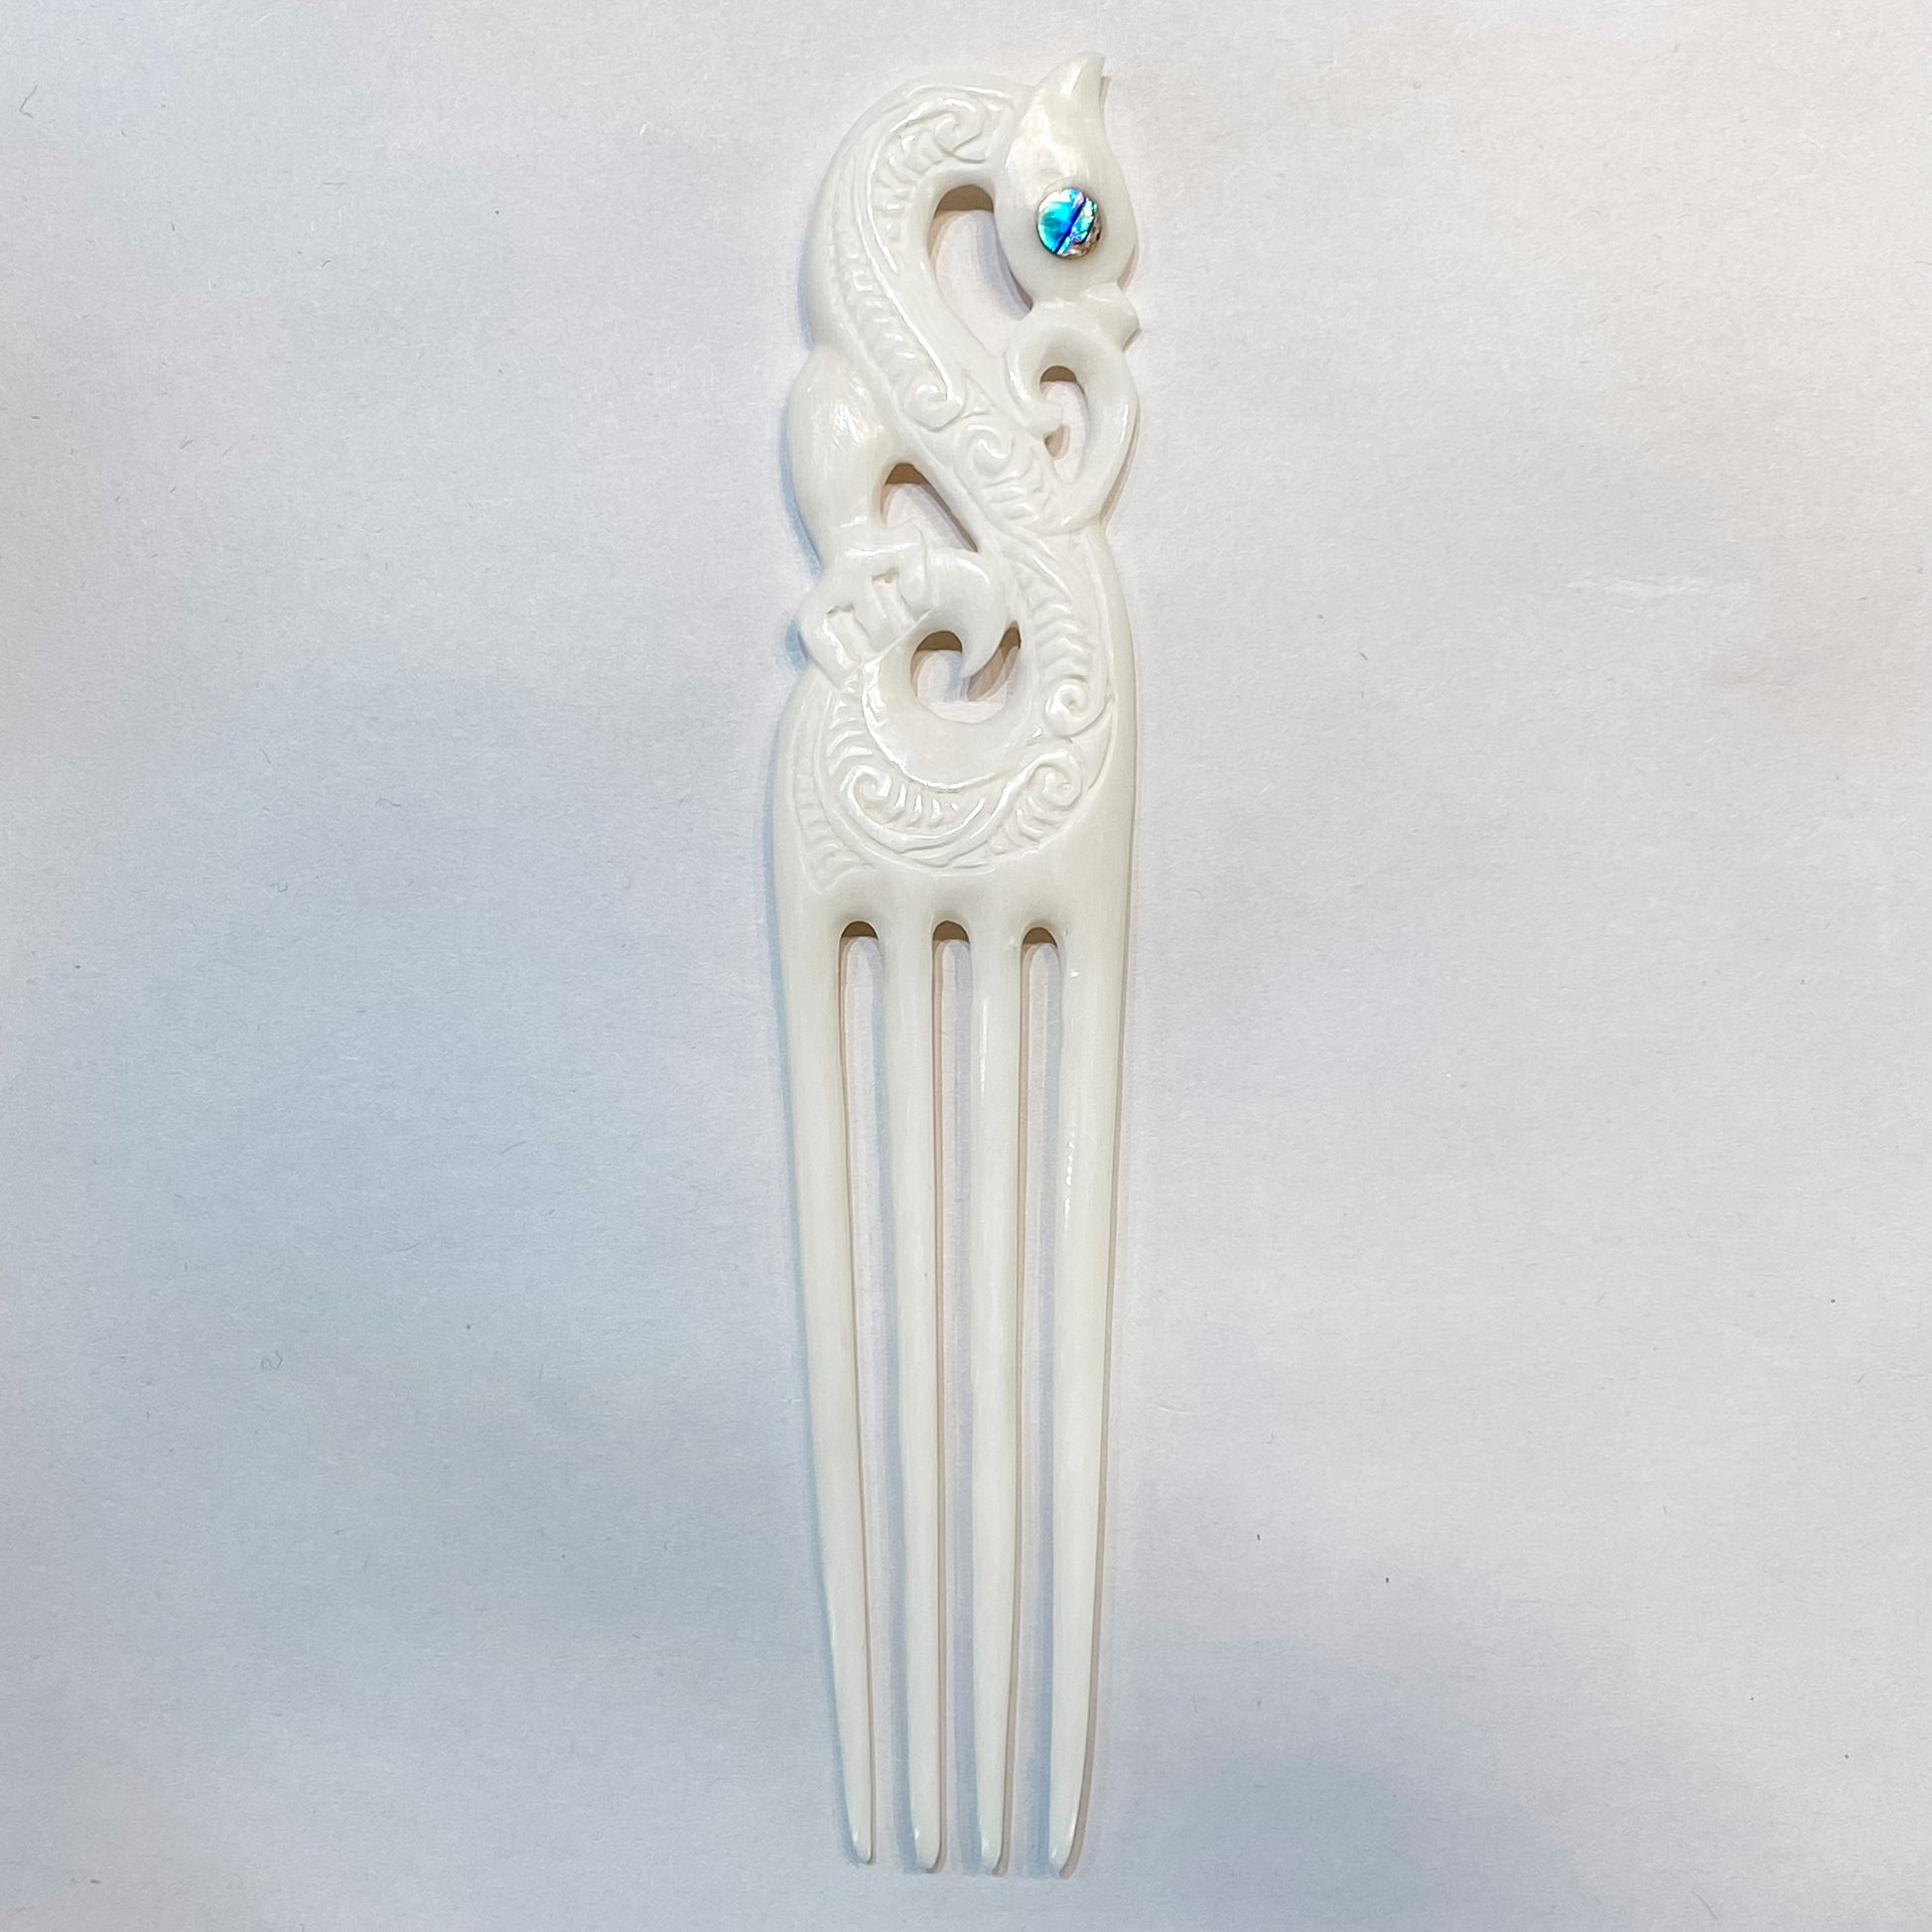 Handcarved Intricate Bone Carving - Manaia Comb - Rivendell Shop